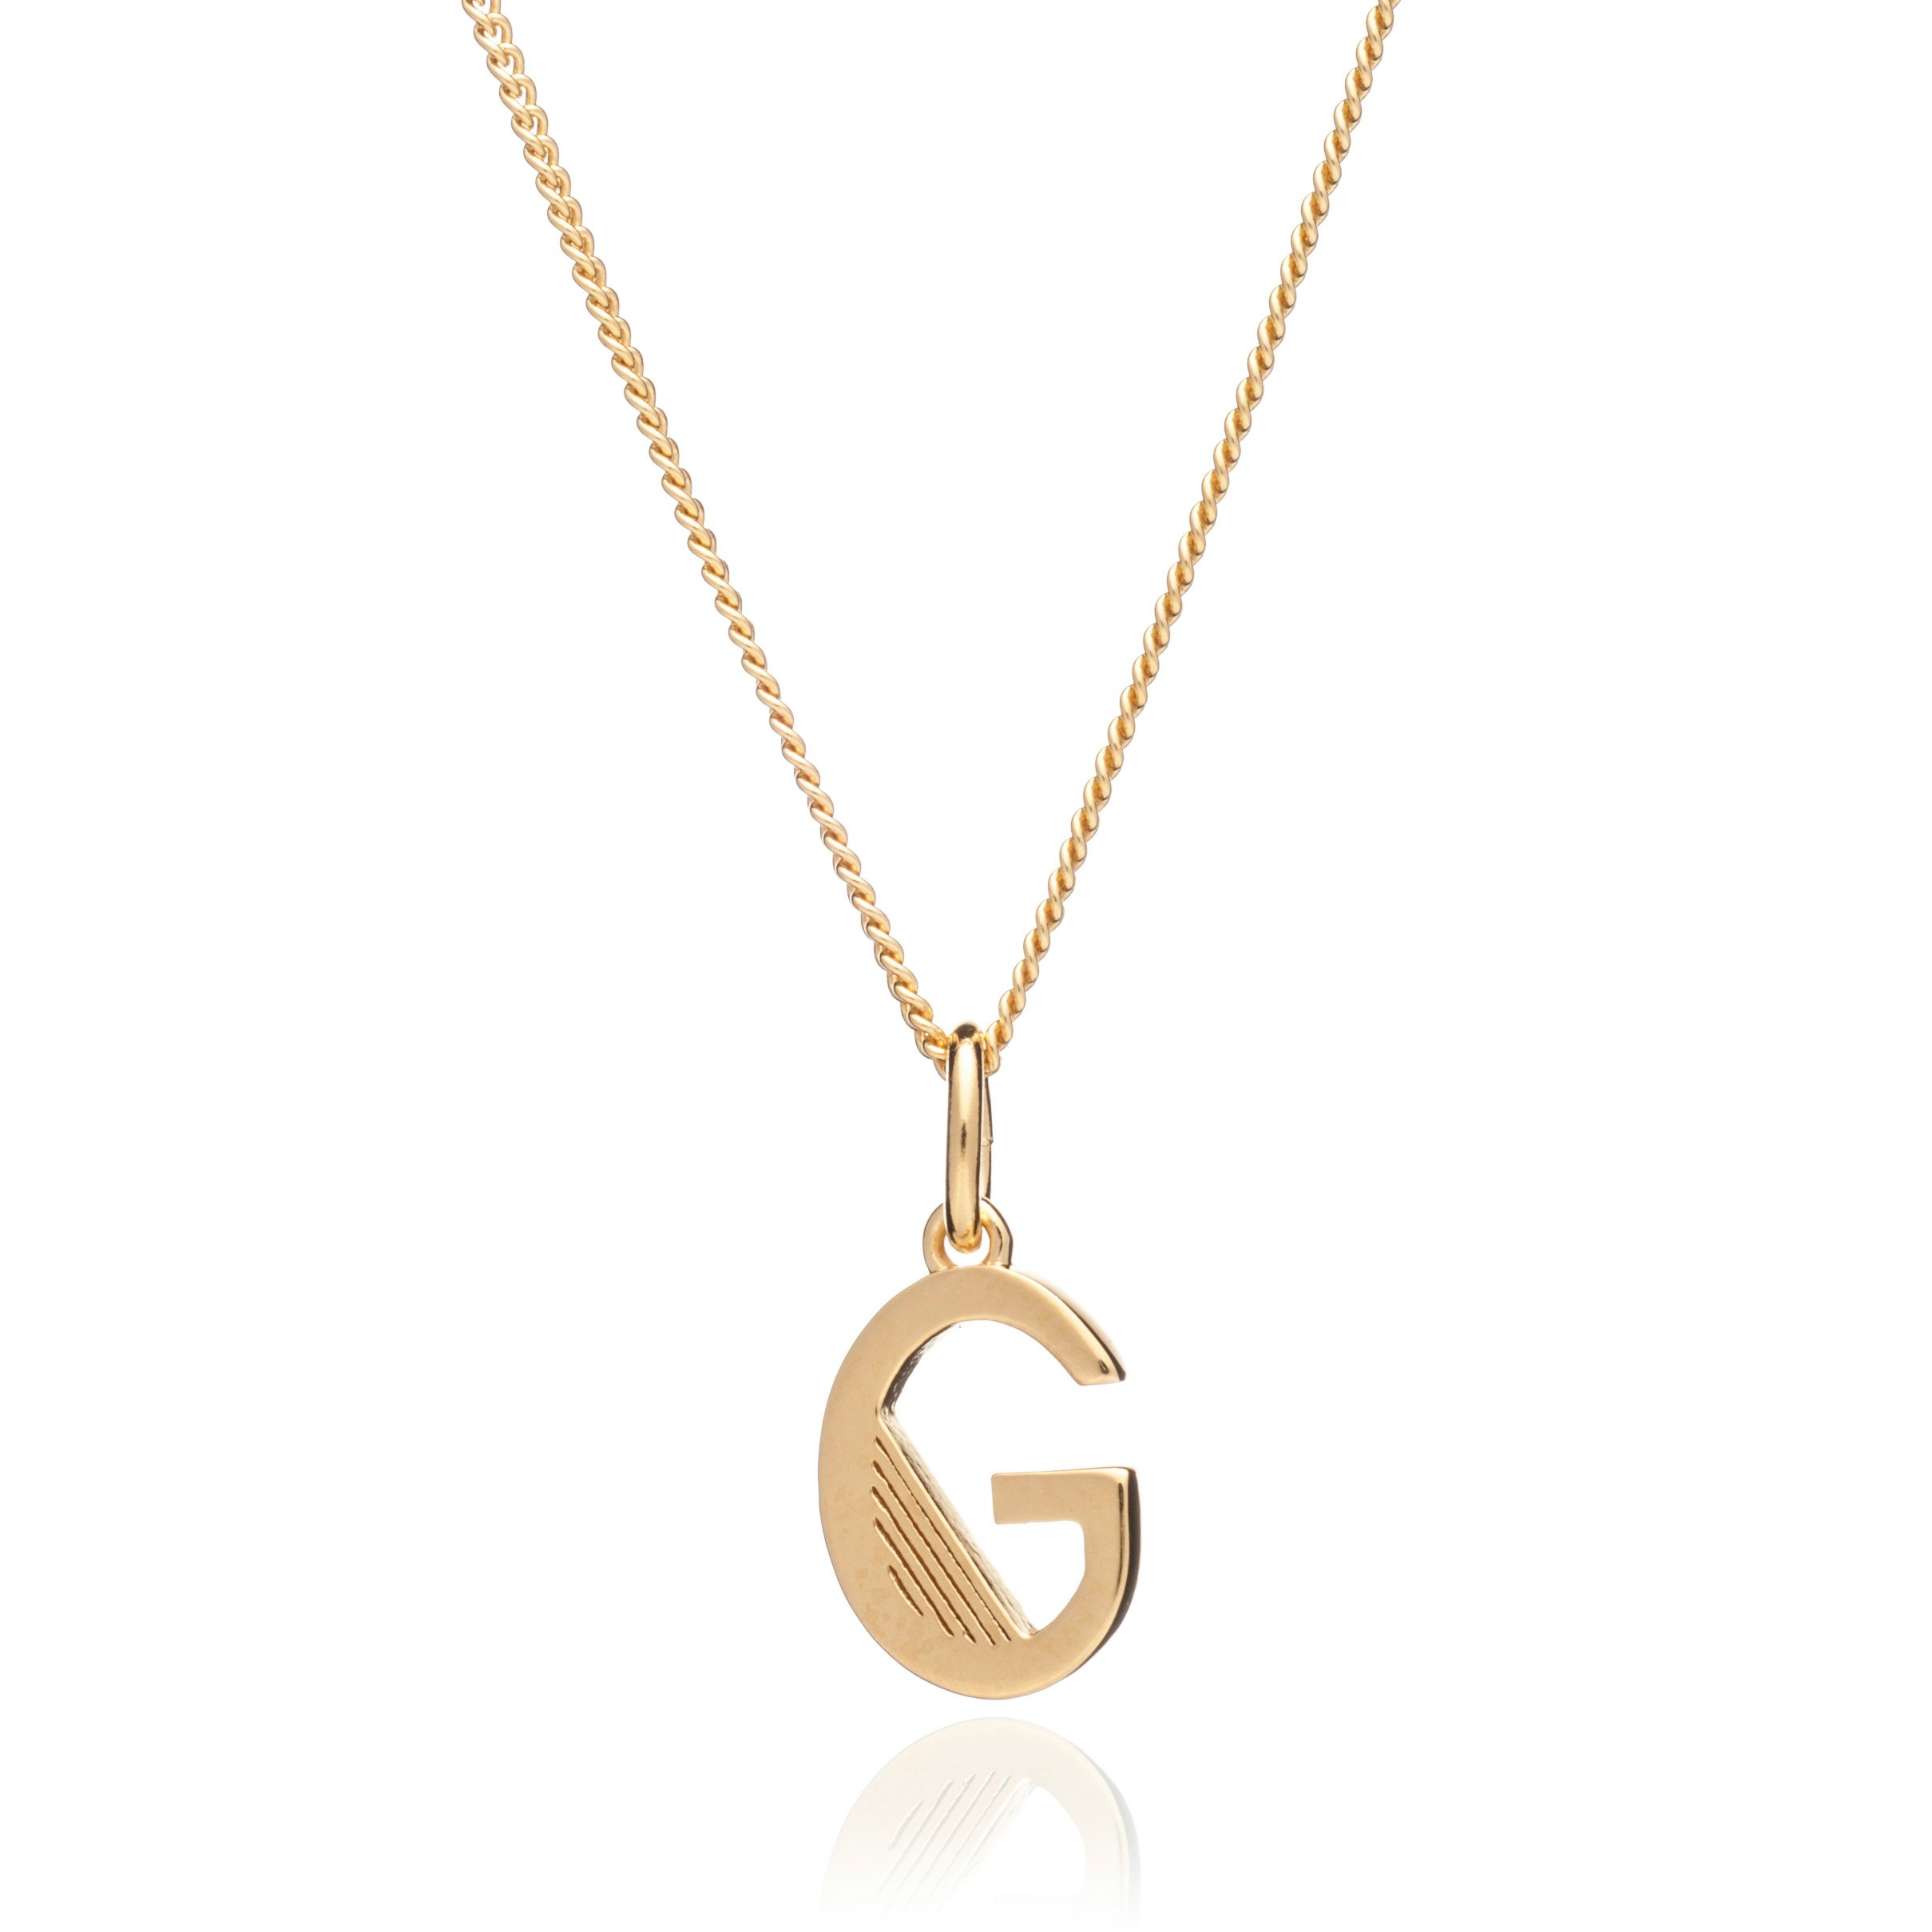 How To Wear Initial Necklaces, Because 